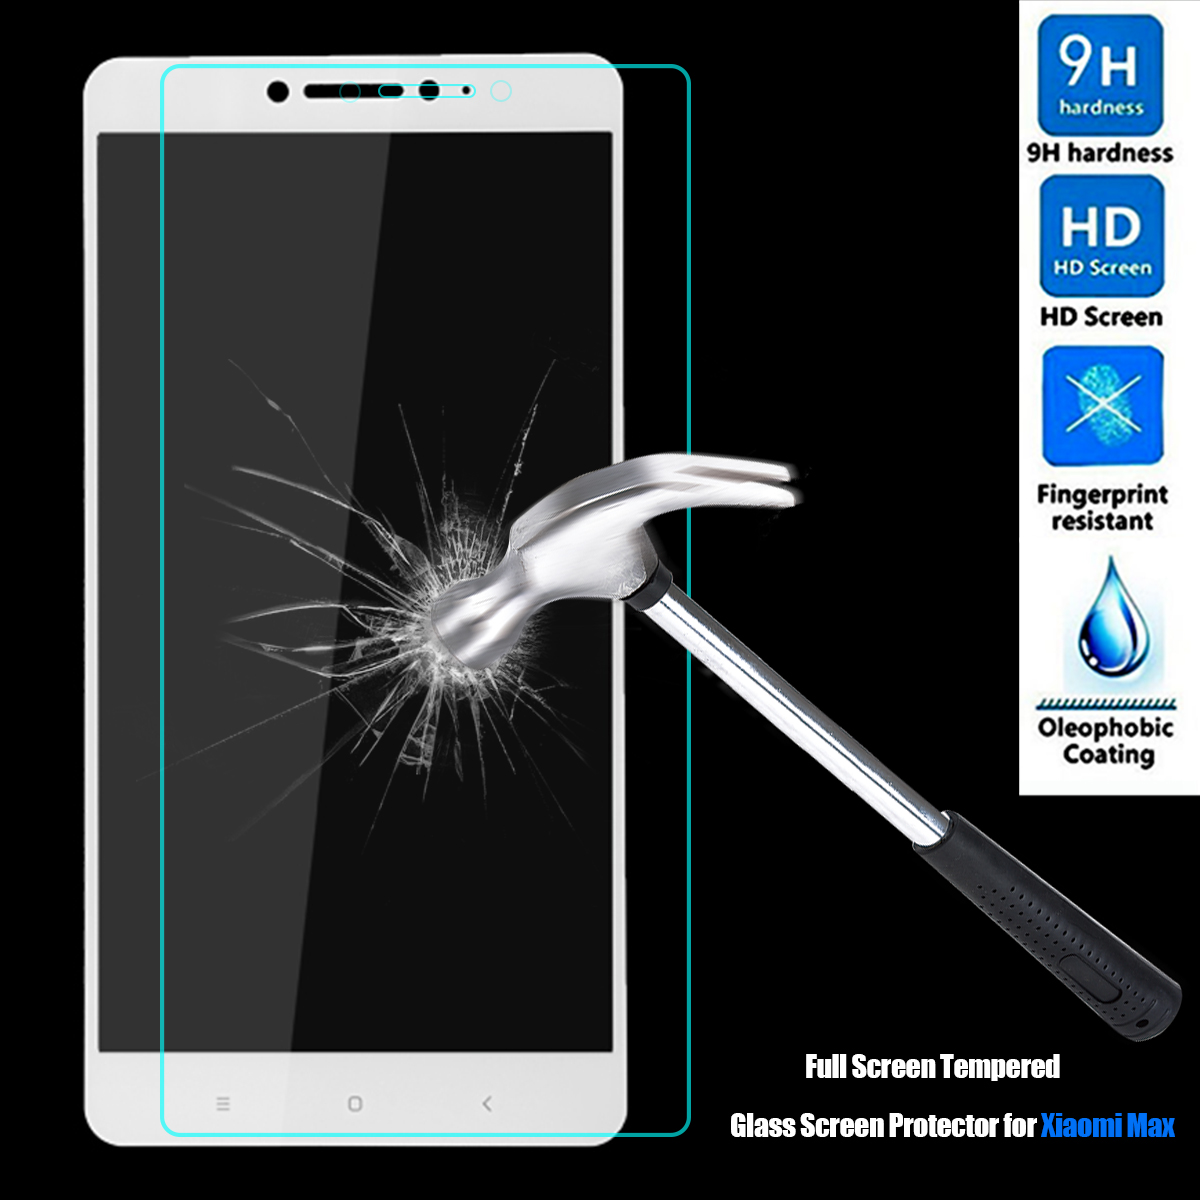 026mm-9H-Full-Screen-Tempered-Glass-Screen-Protector-for-Xiaomi-Mi-Max-1170892